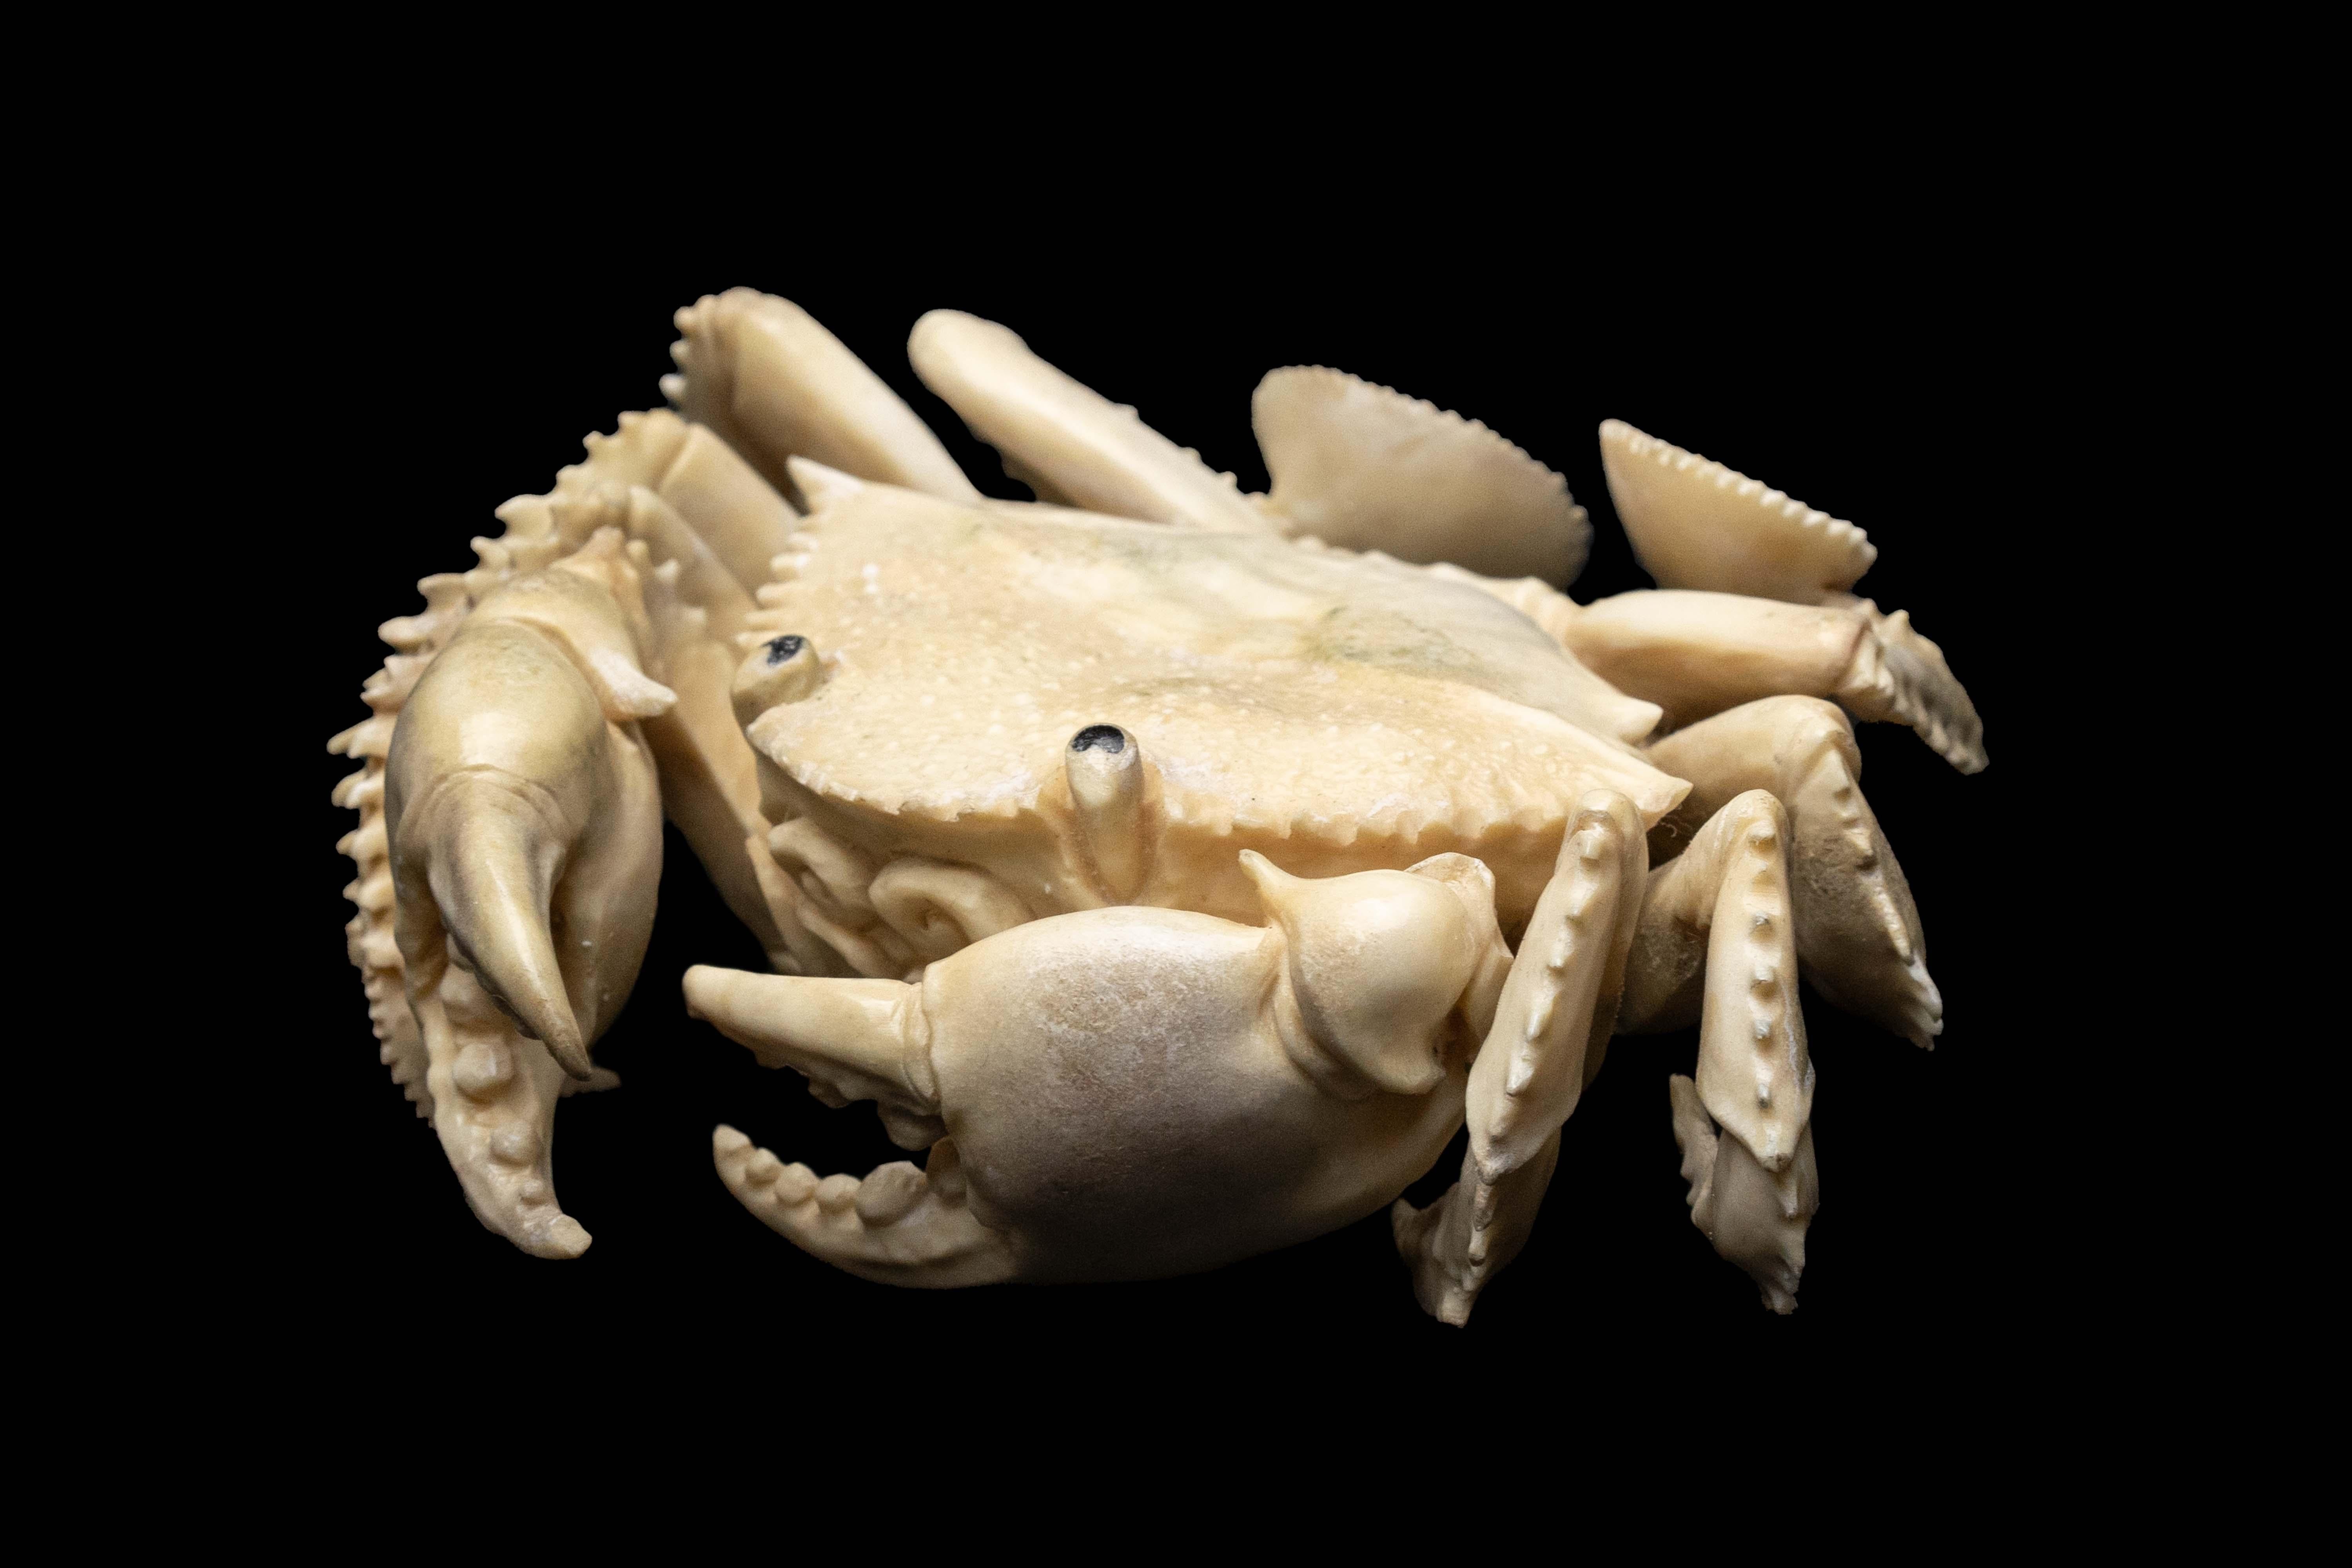 Carved moose antler crab. Detailed moose antler carving of a Crab, from Indonesia. This is a one of a kind object. The moose antler was sourced in North America and then sent to Asia for carving. Quality of ivory, but with sustainability, as the